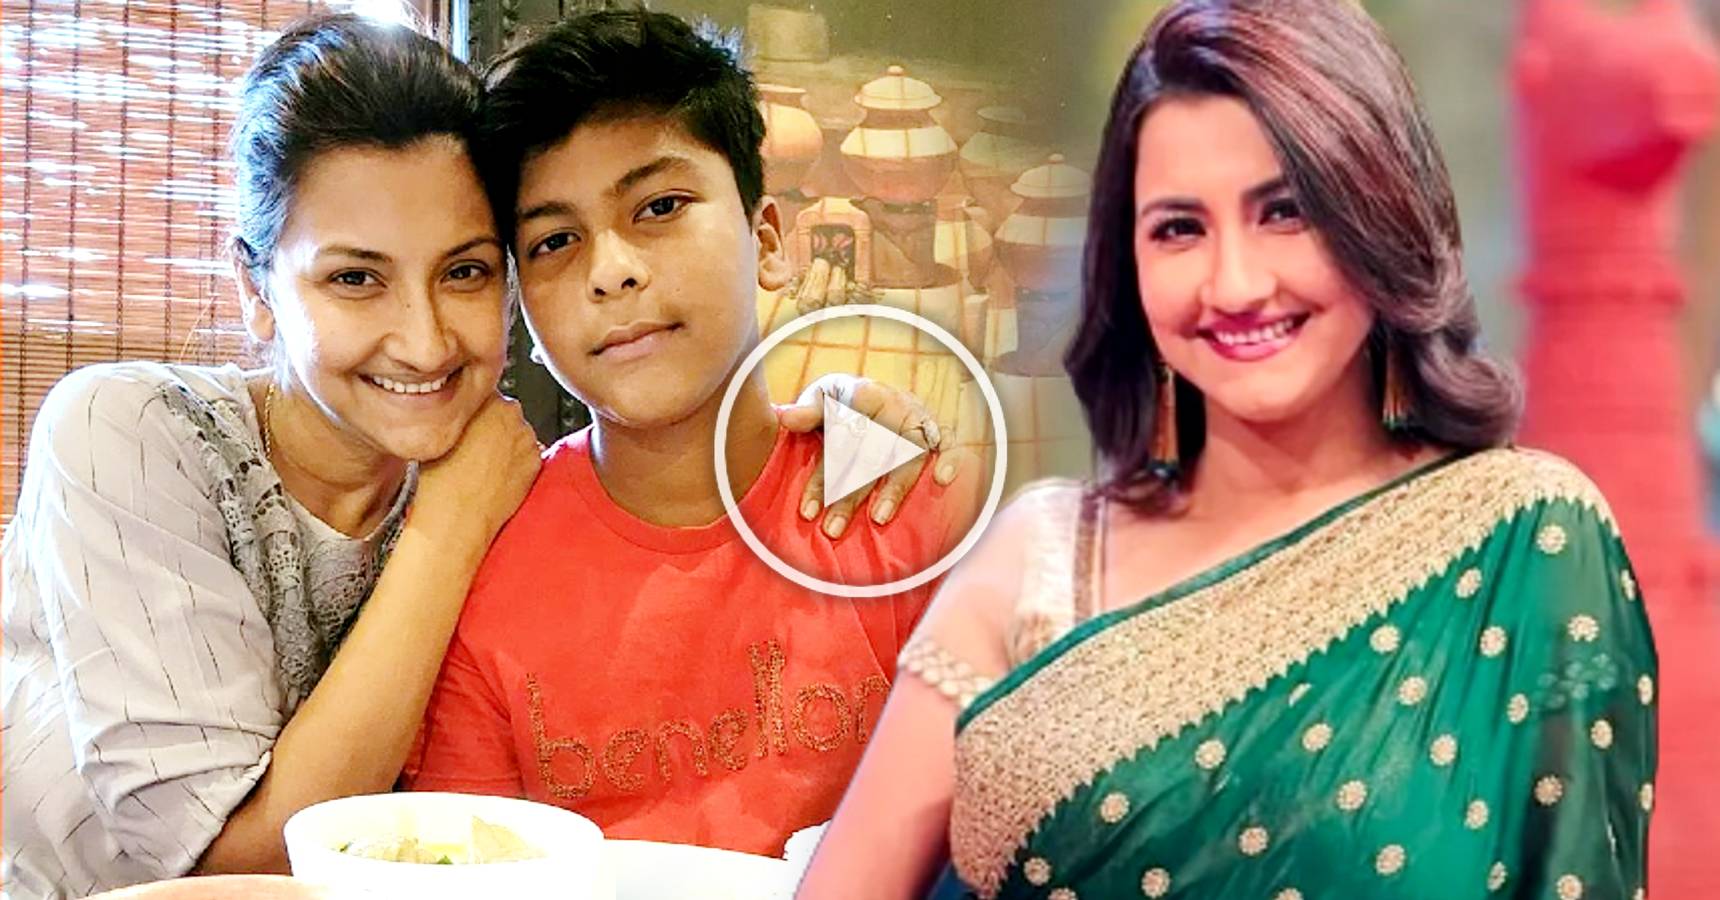 The way Raunak takes care of me is very special, Didi No. 1 Rachana Banerjee praises her son